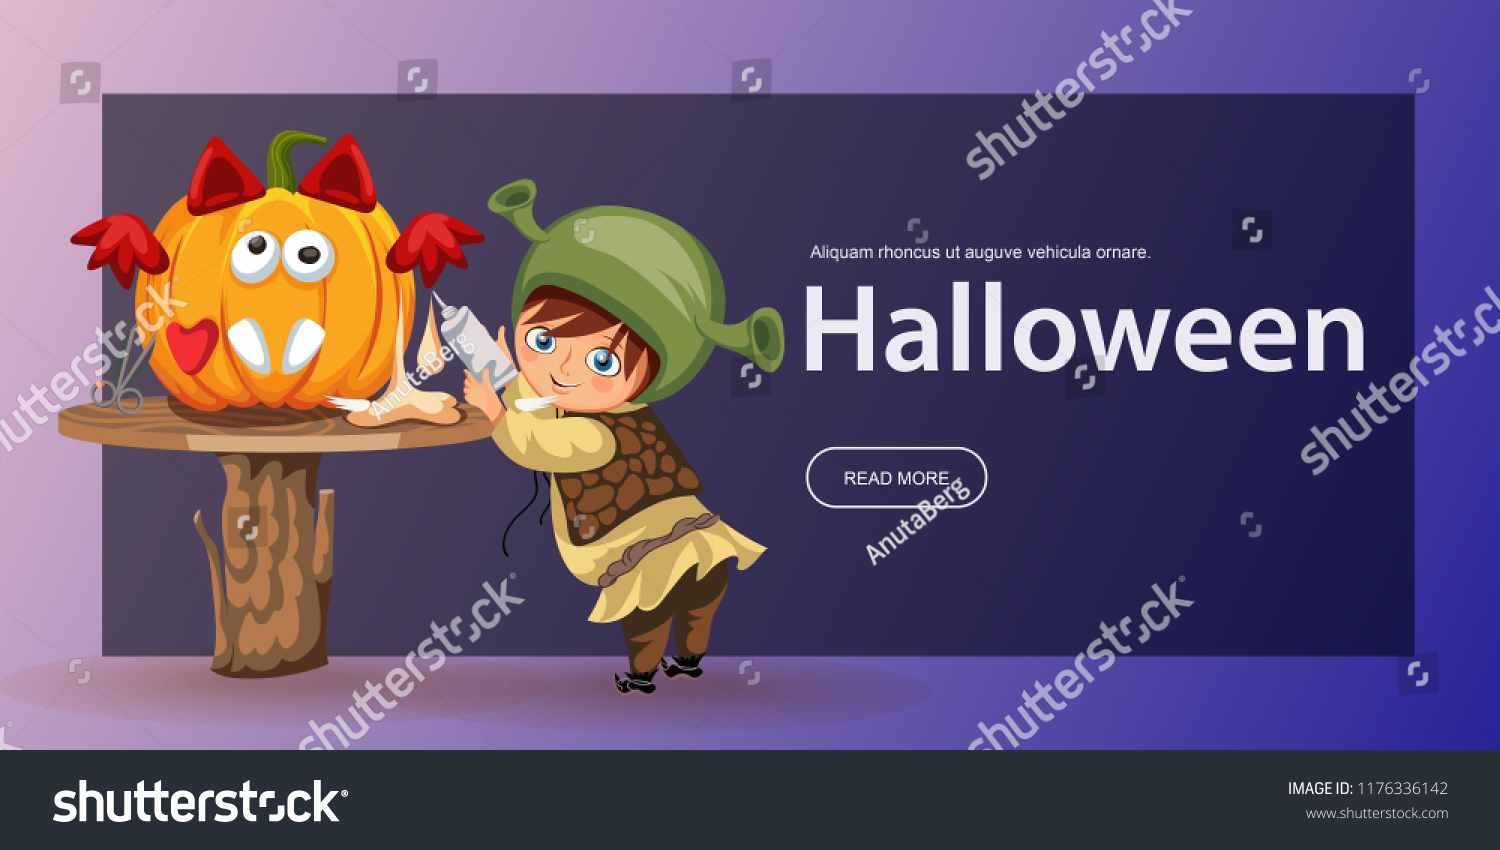 SVG of Cartoon little kid preparing for All Hallows Eve poster. child dressed in costume shrek carving Halloween pumpkin vector illustration template design with promo text elements in colorful background. svg